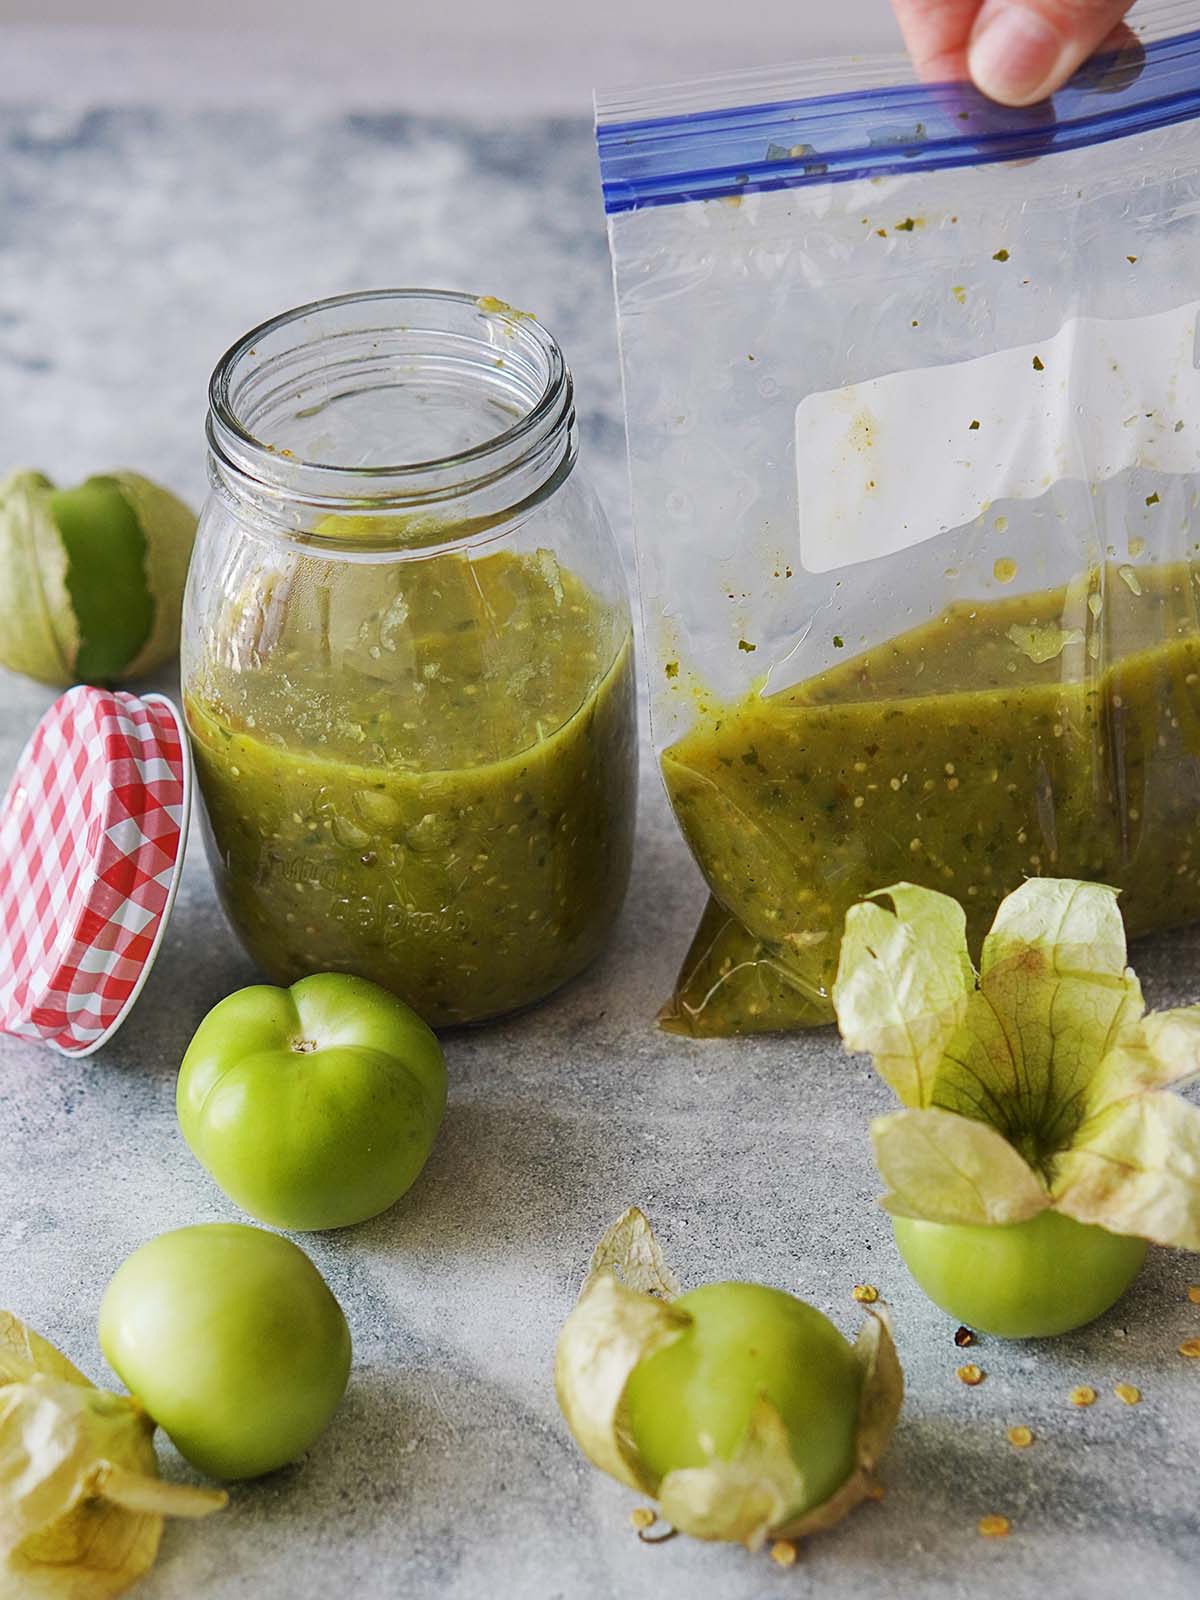 Tomatillo sauce in a ziploc bag and some in a glass container.